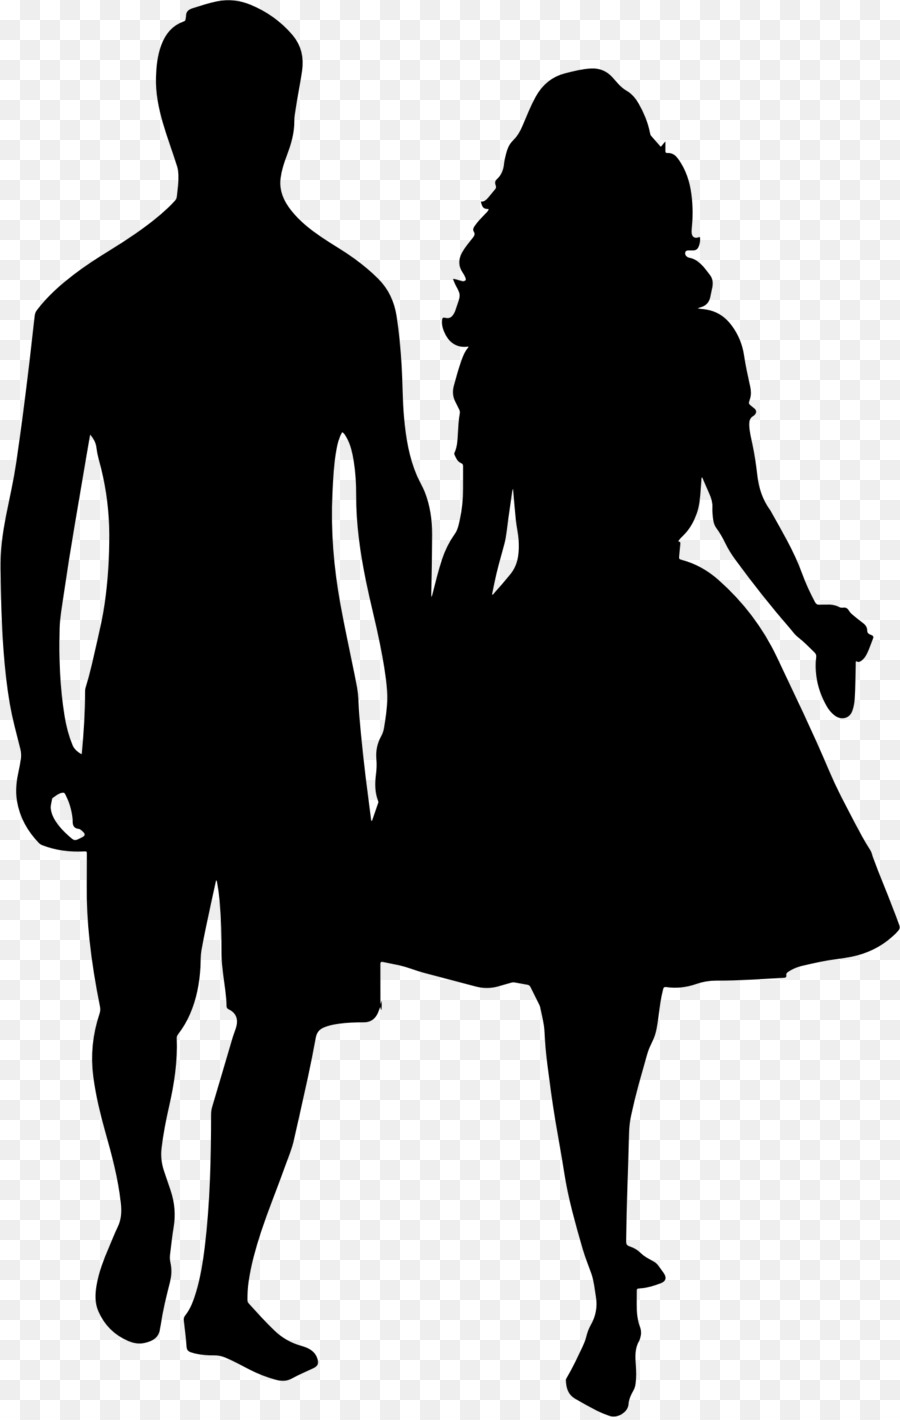 Holding hands Silhouette couple Clip art - love couple png download - 1459*2297 - Free Transparent  png Download.